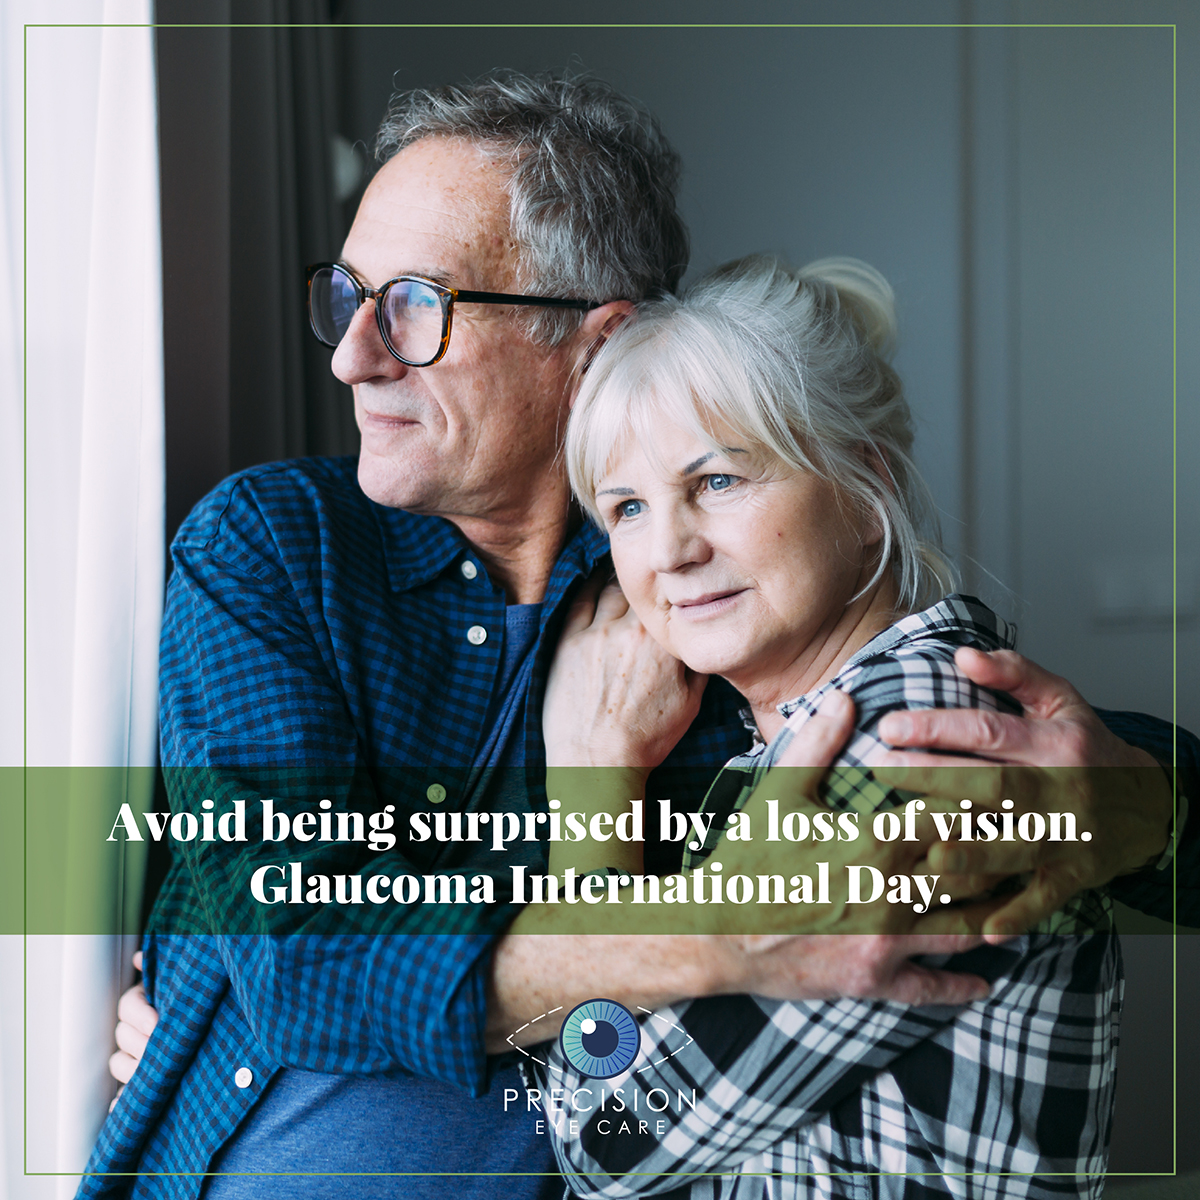 Avoid being surprised by a loss of vision. Glaucoma International Day.